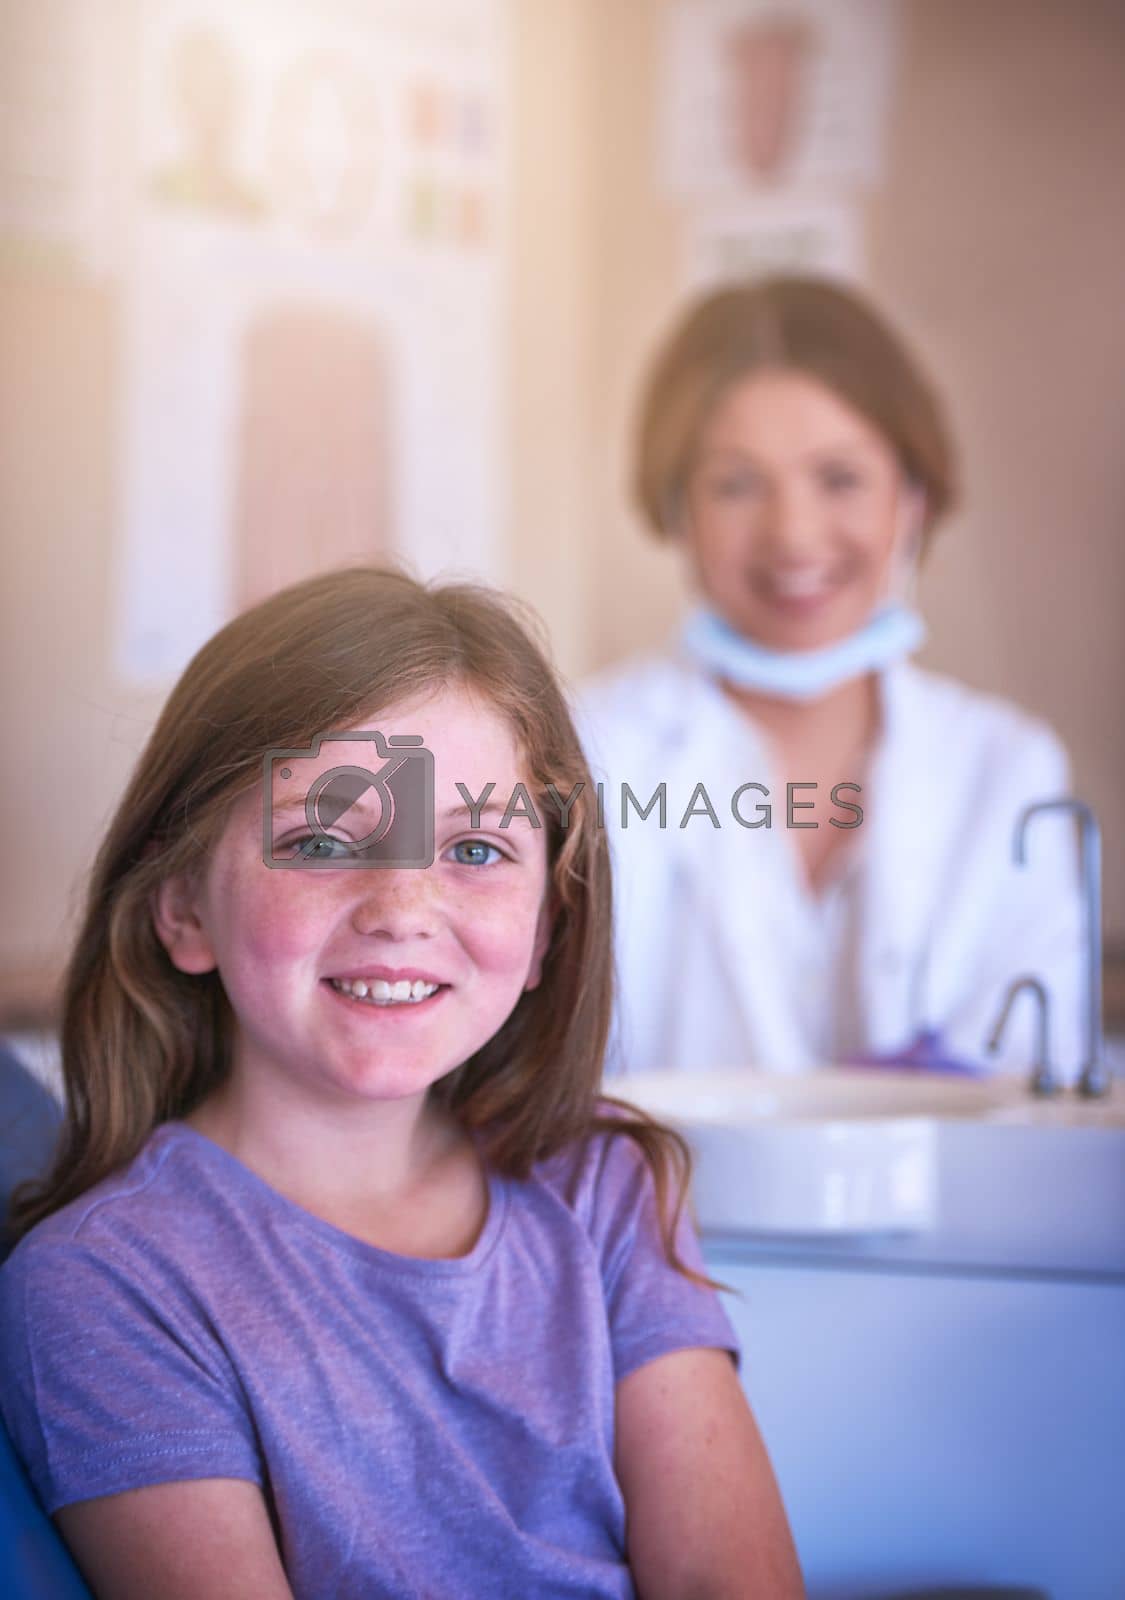 Royalty free image of I enjoy my dentist visits, I dont need bribery. a little girl at the dentist for a checkup. by YuriArcurs